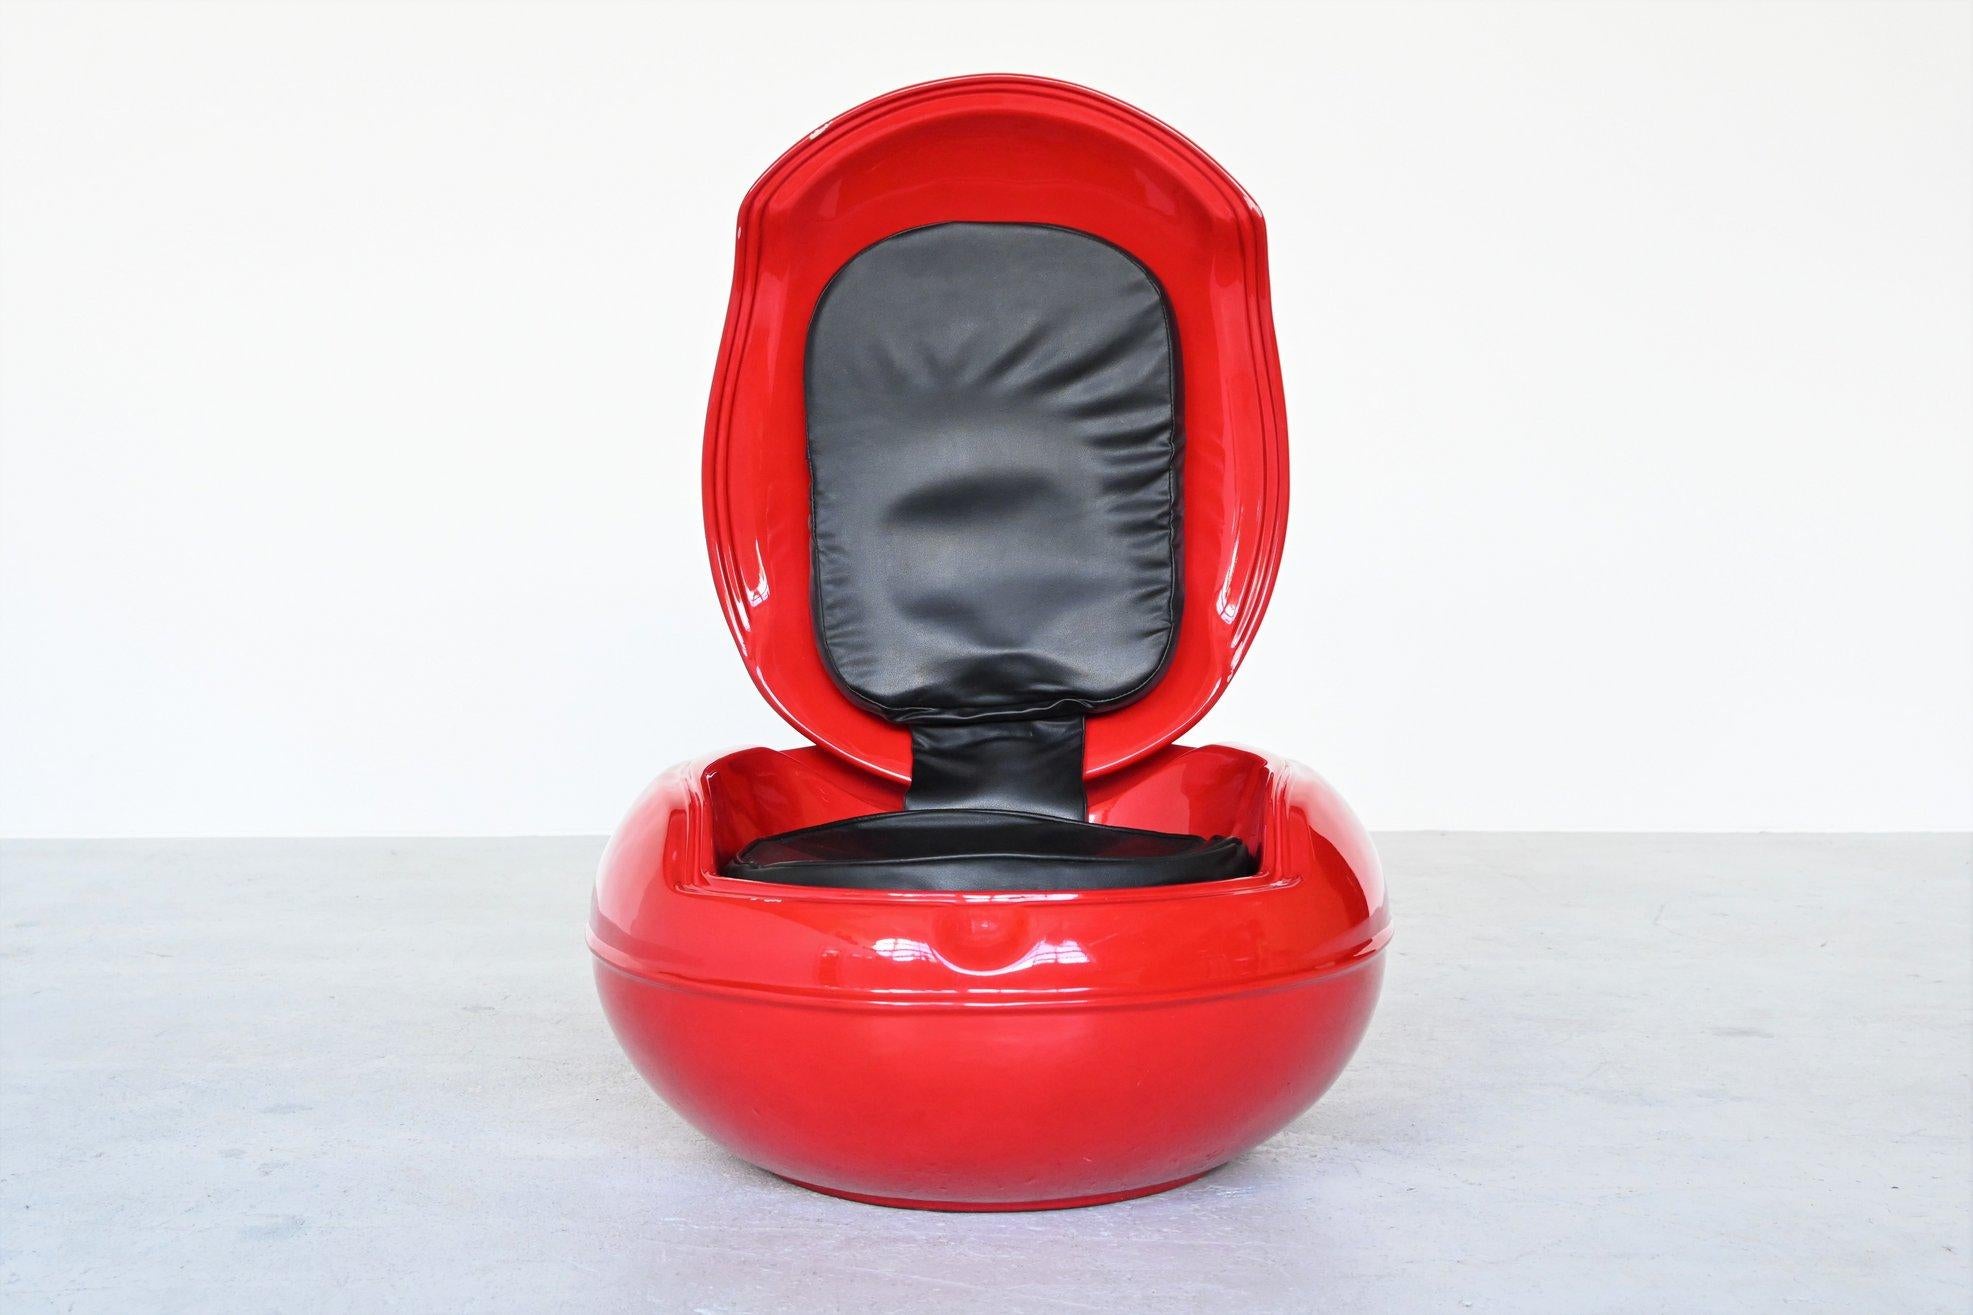 Iconic red garden Senftenberg egg chair designed by Peter Ghyczy, Germany, 1968. This collectable egg chair was the first chair in the world that is made of polyurethane. The seat is made of black leather. It’s completely waterproof when flipping